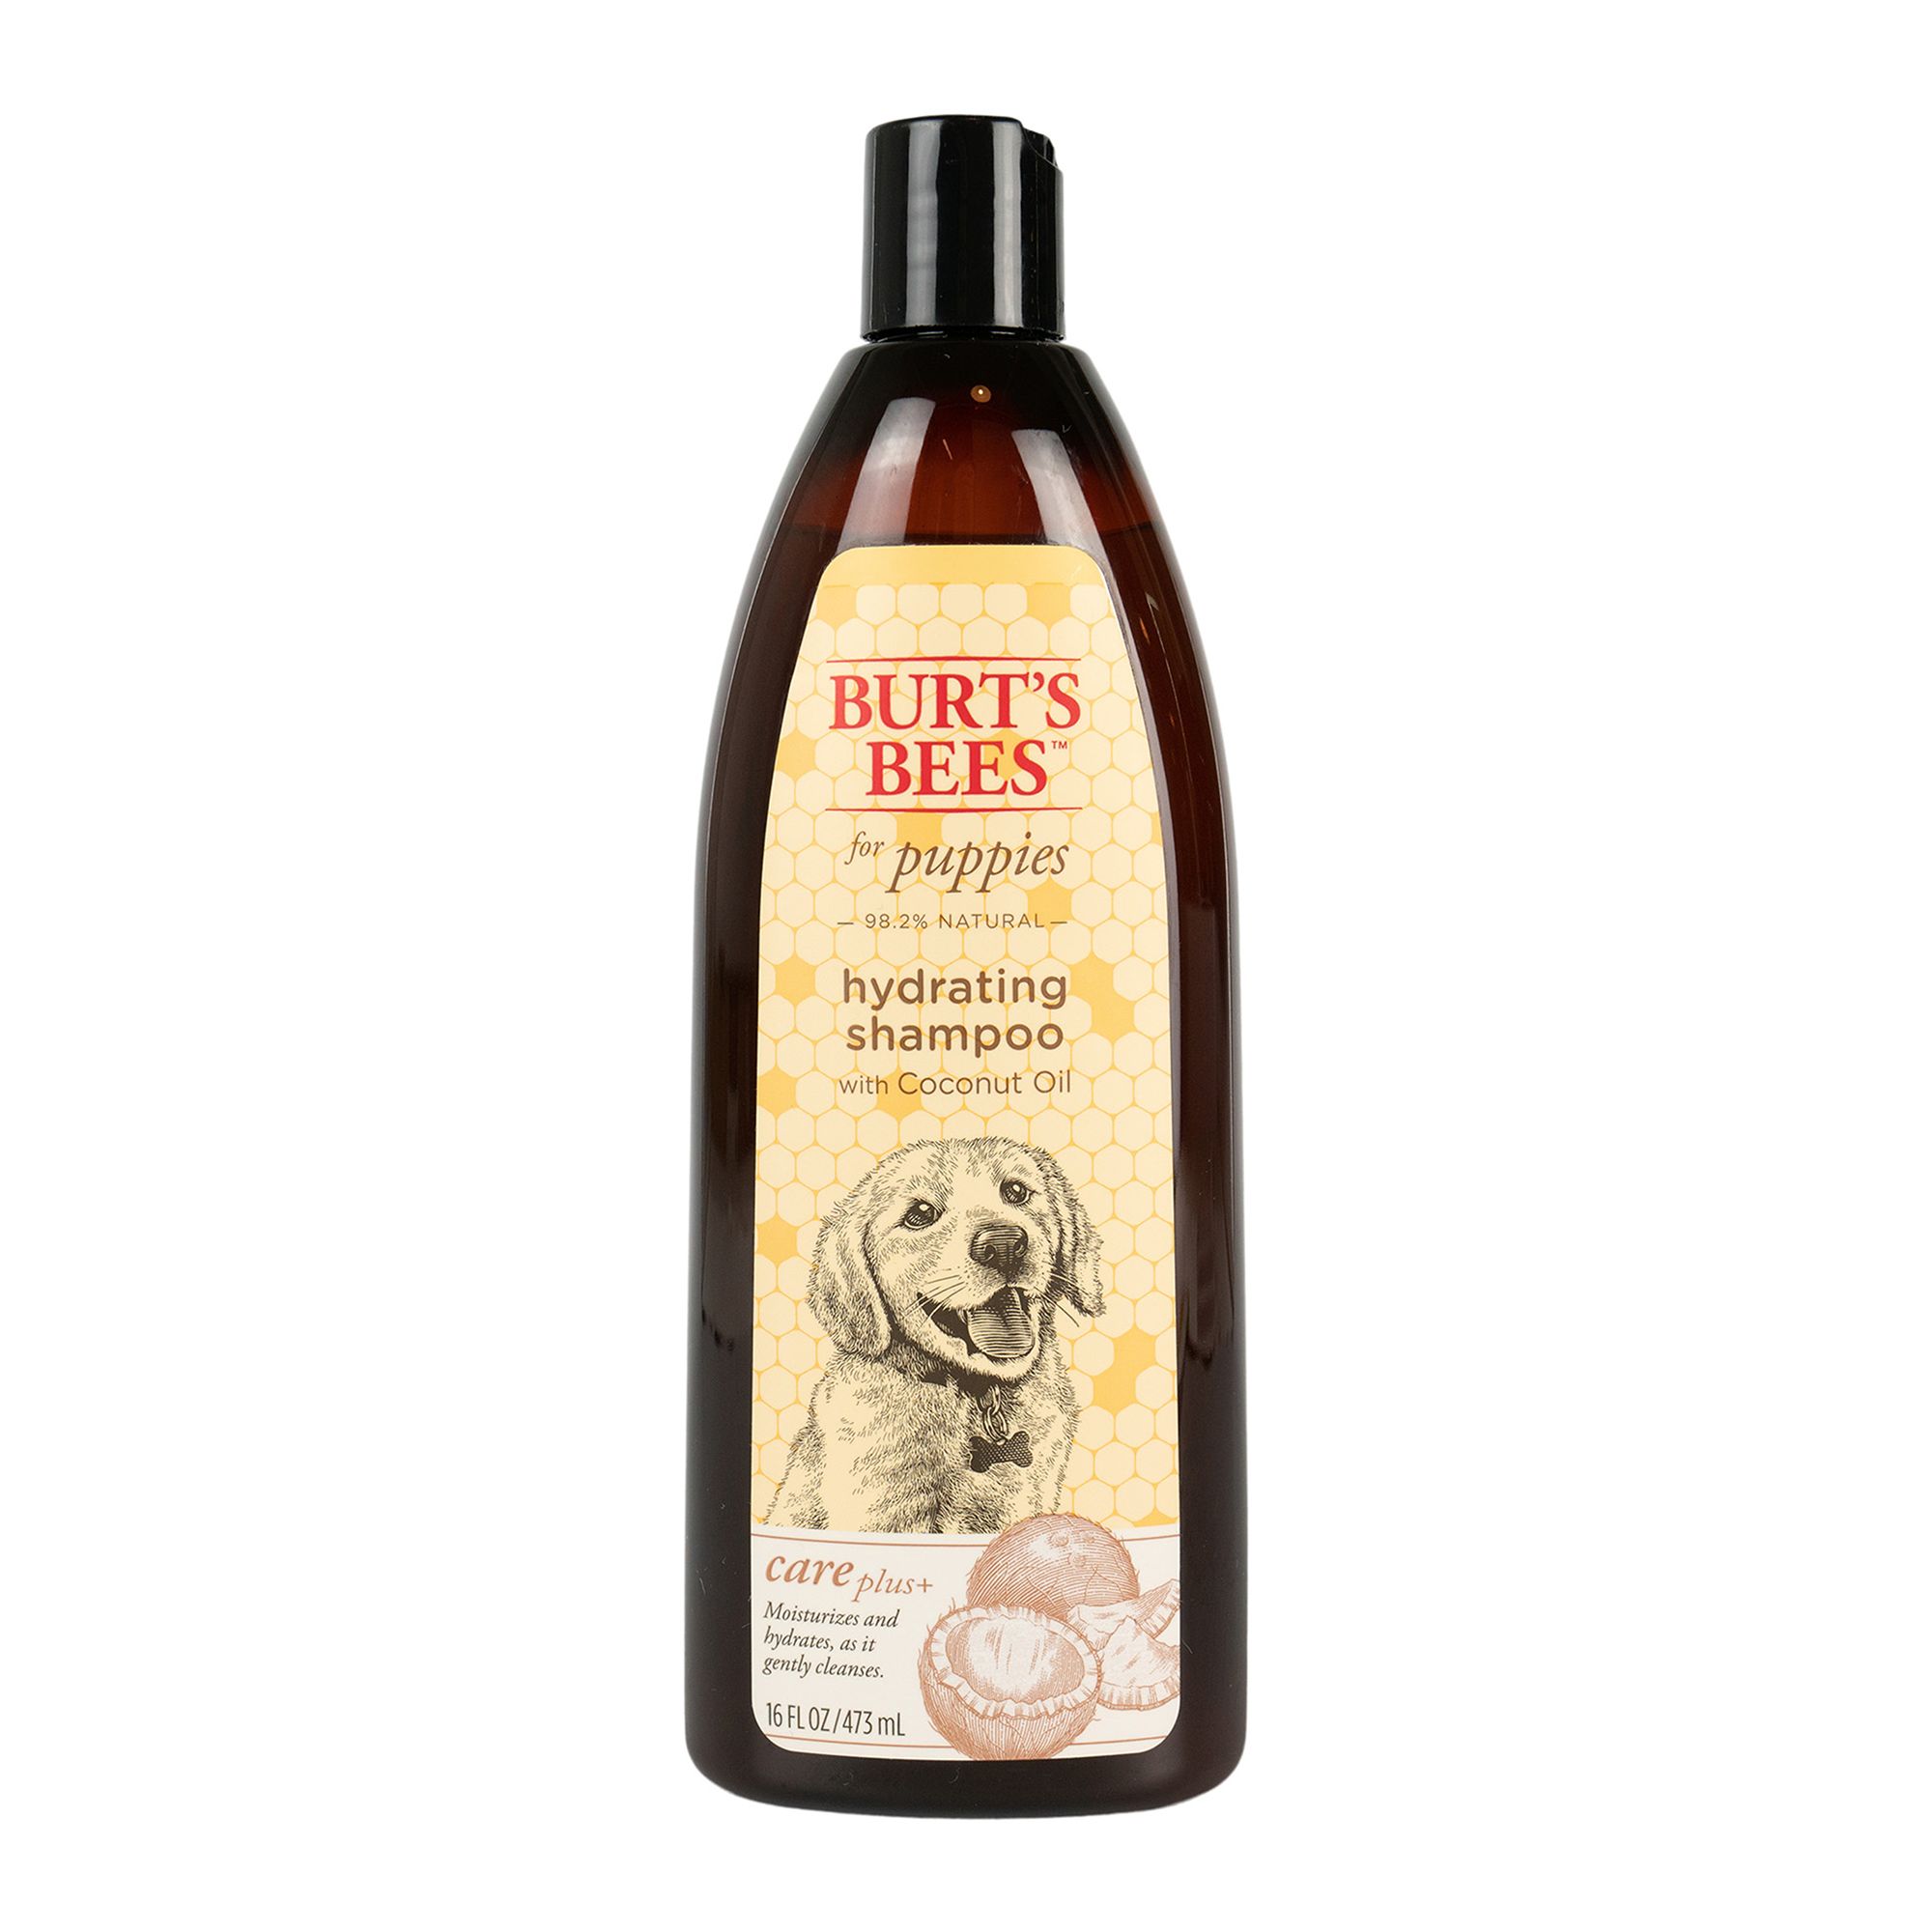 burt's bees puppy shampoo and conditioner reviews